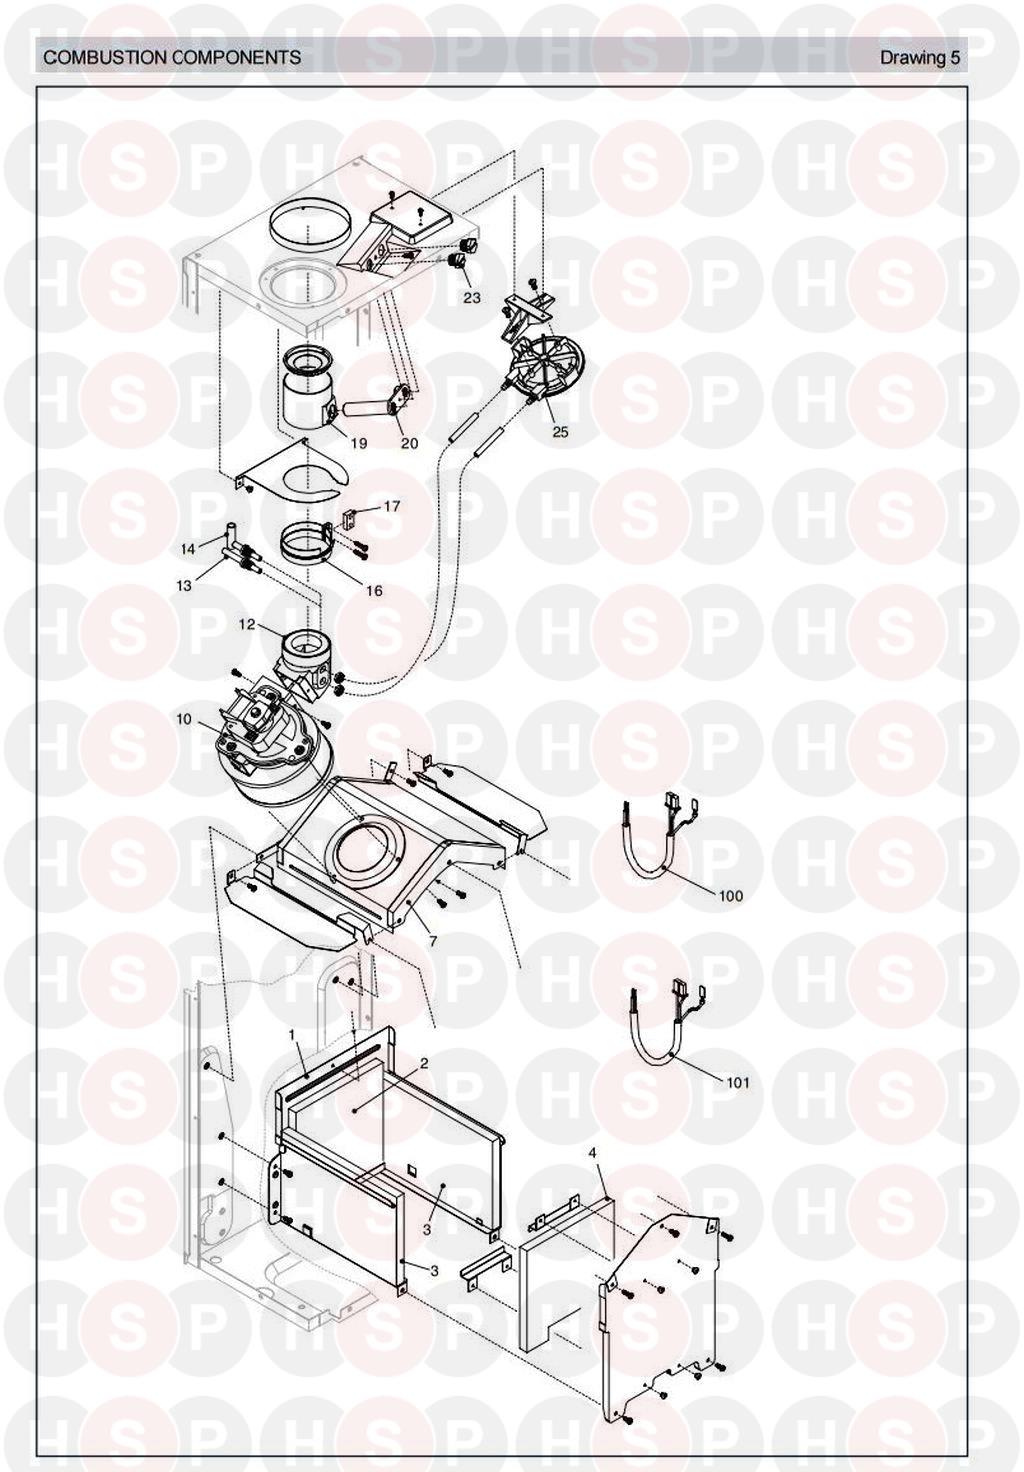 Combustion Chamber diagram for Vokera Mynute 12 E Rev 4 (02/08)